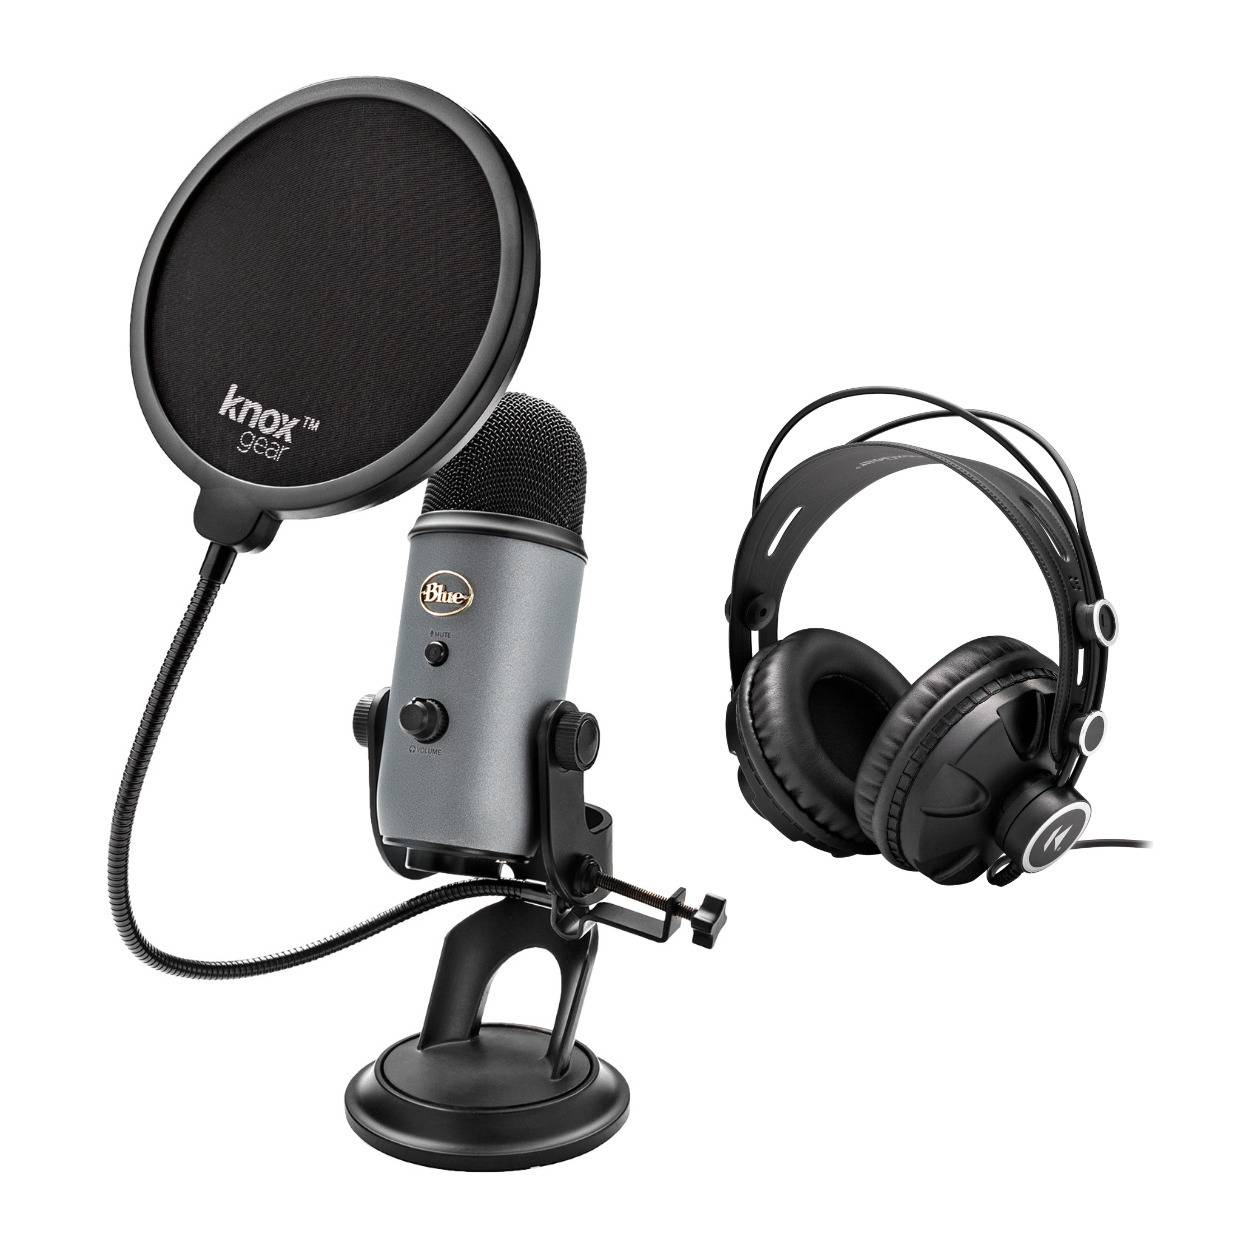 Blue Microphones Yeti Slate USB Microphone Bundle with Over-Ear Headphone and Knox Gear Pop Filter